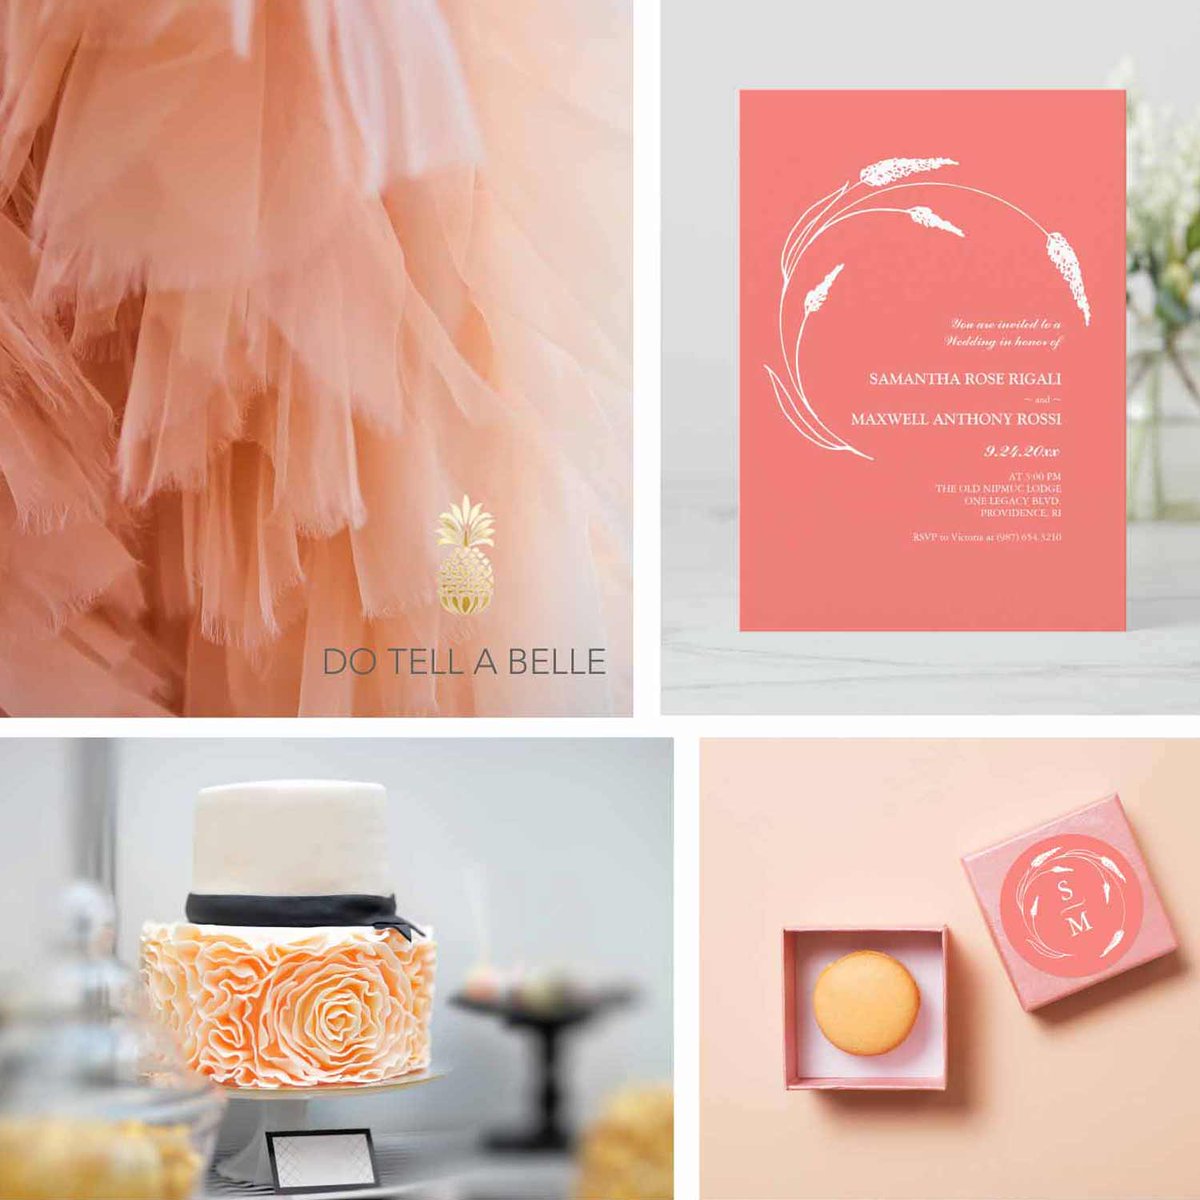 If you are searching for wedding ideas, then spring 2024 is an ideal season to celebrate your love story with its lush blossoms, mild temperatures, and a sense of renewal in the air. dotellabelle.com/spring-wedding… #WeddingTrends2024 #2024WeddingInspo #FutureWeddingTrends